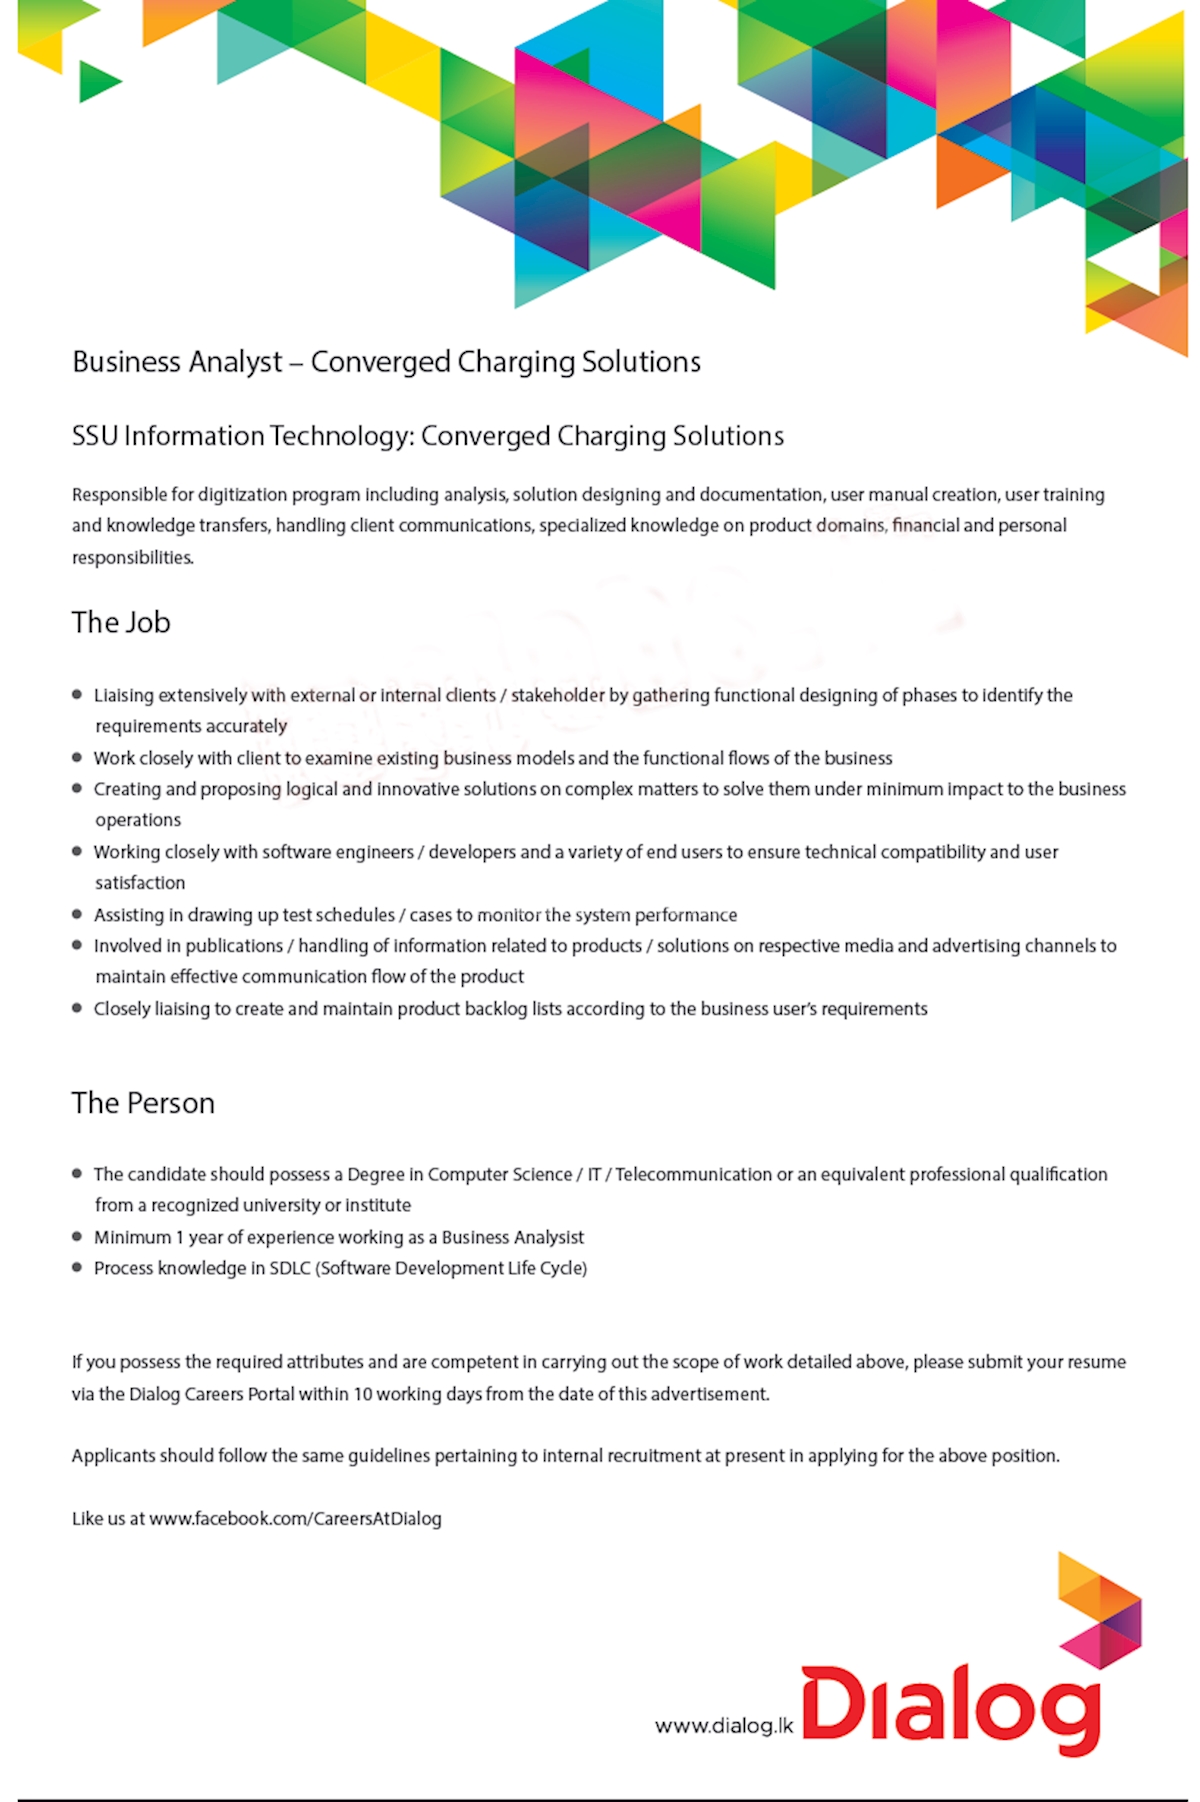 Business Analyst - Converged Charging Solutions